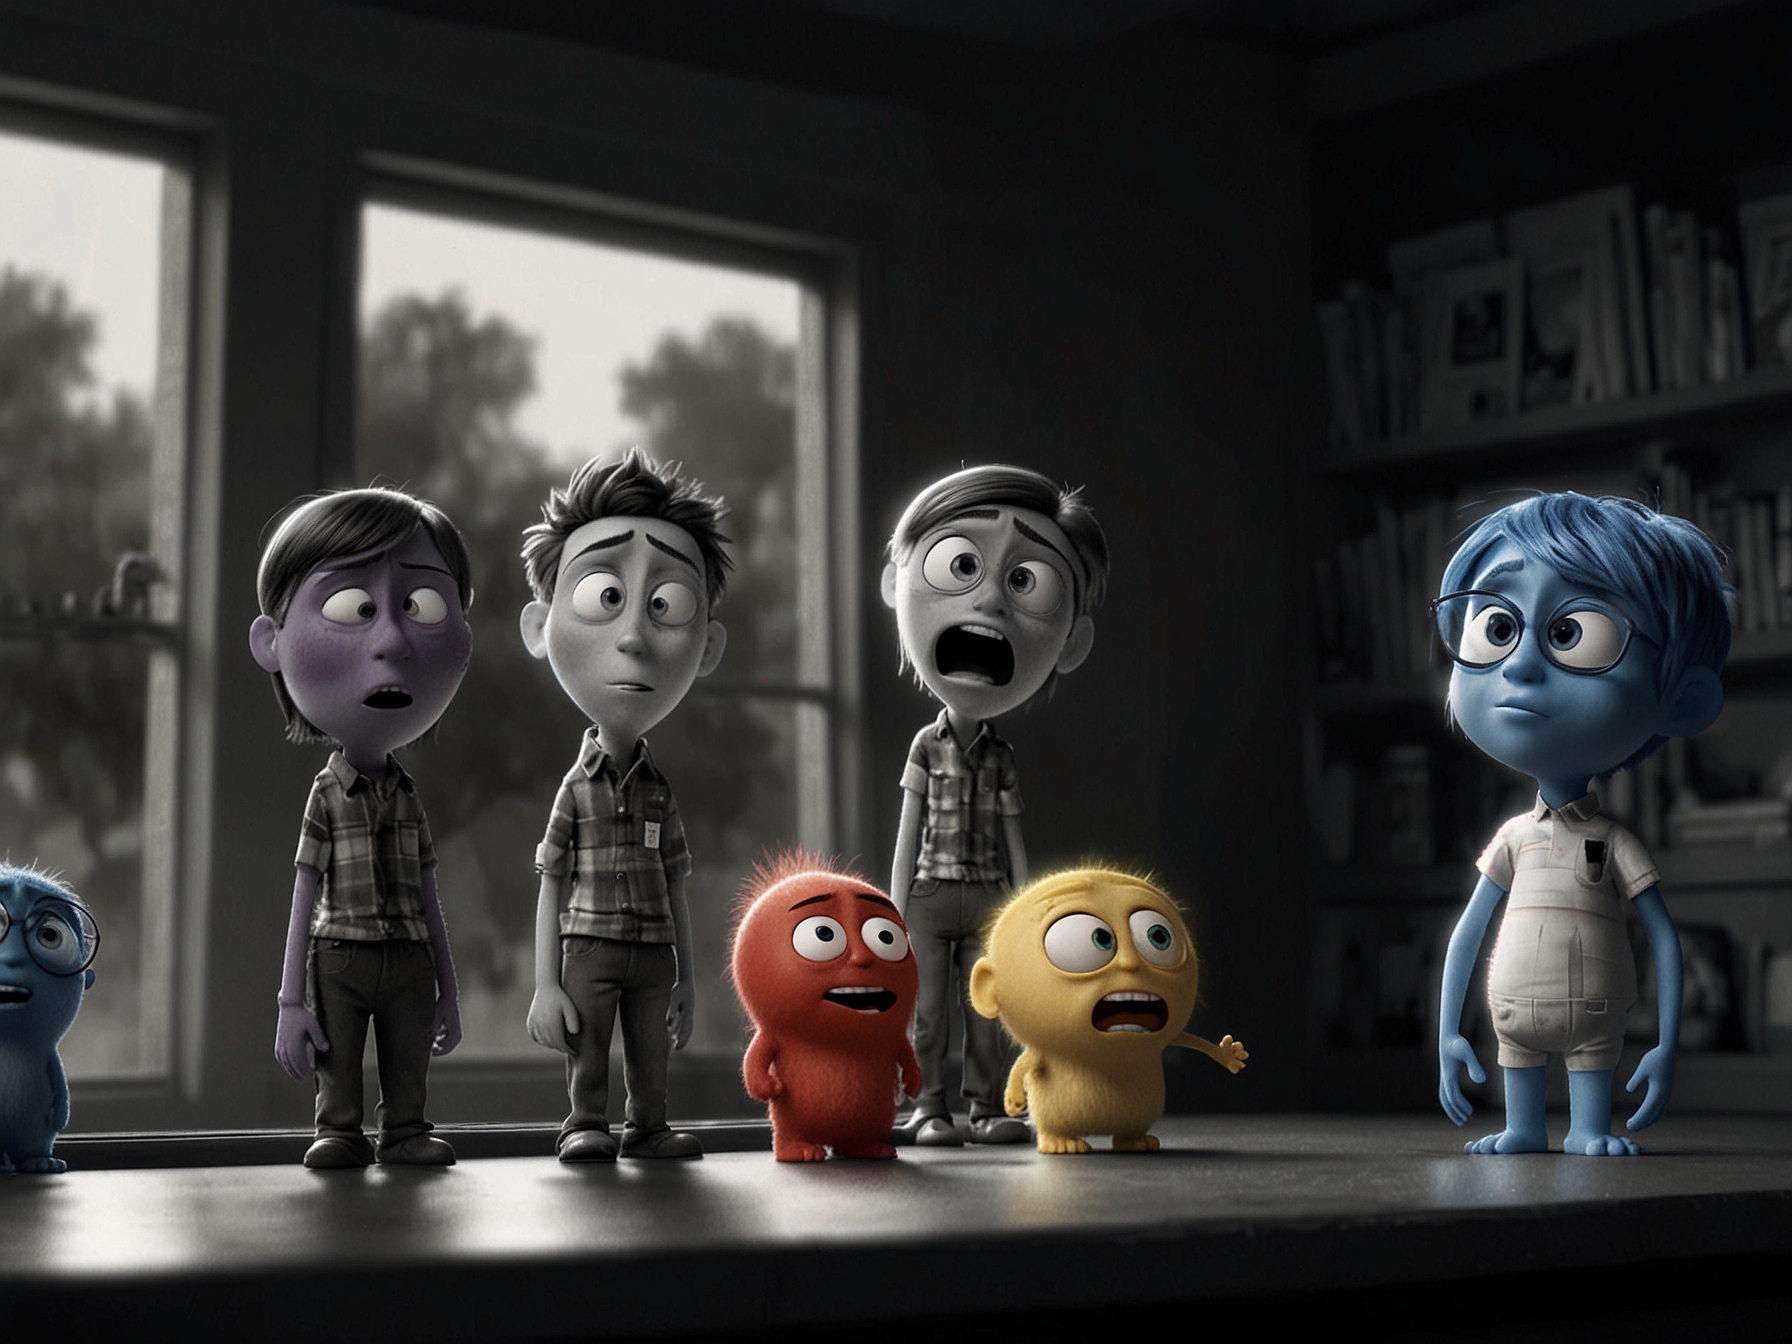 A Pixar animation studio image showing the character 'ennui' interacting with other core emotions from Inside Out, such as Joy, Sadness, Anger, Fear, and Disgust, highlighting the complexity of teenage emotions.